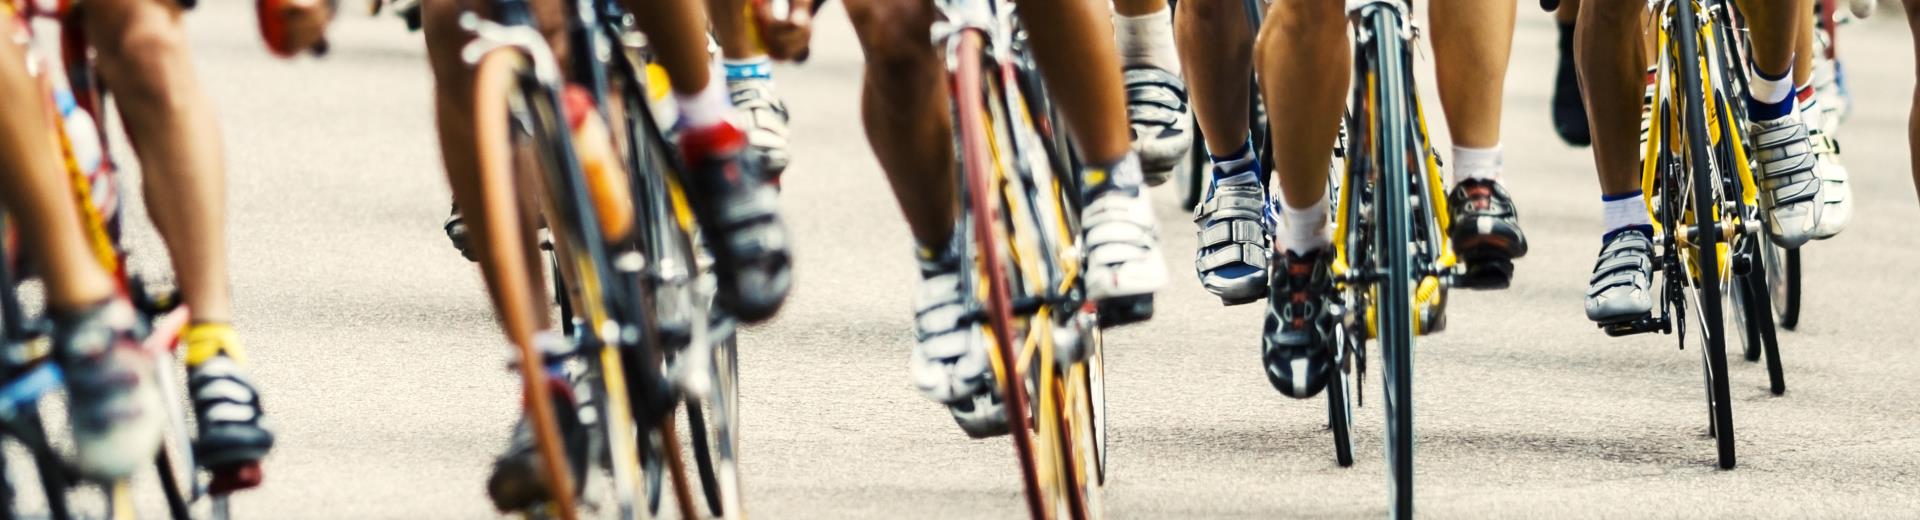 Best Western Plus Hotel Galileo is waiting to host you during cycling event Granfondo Padua